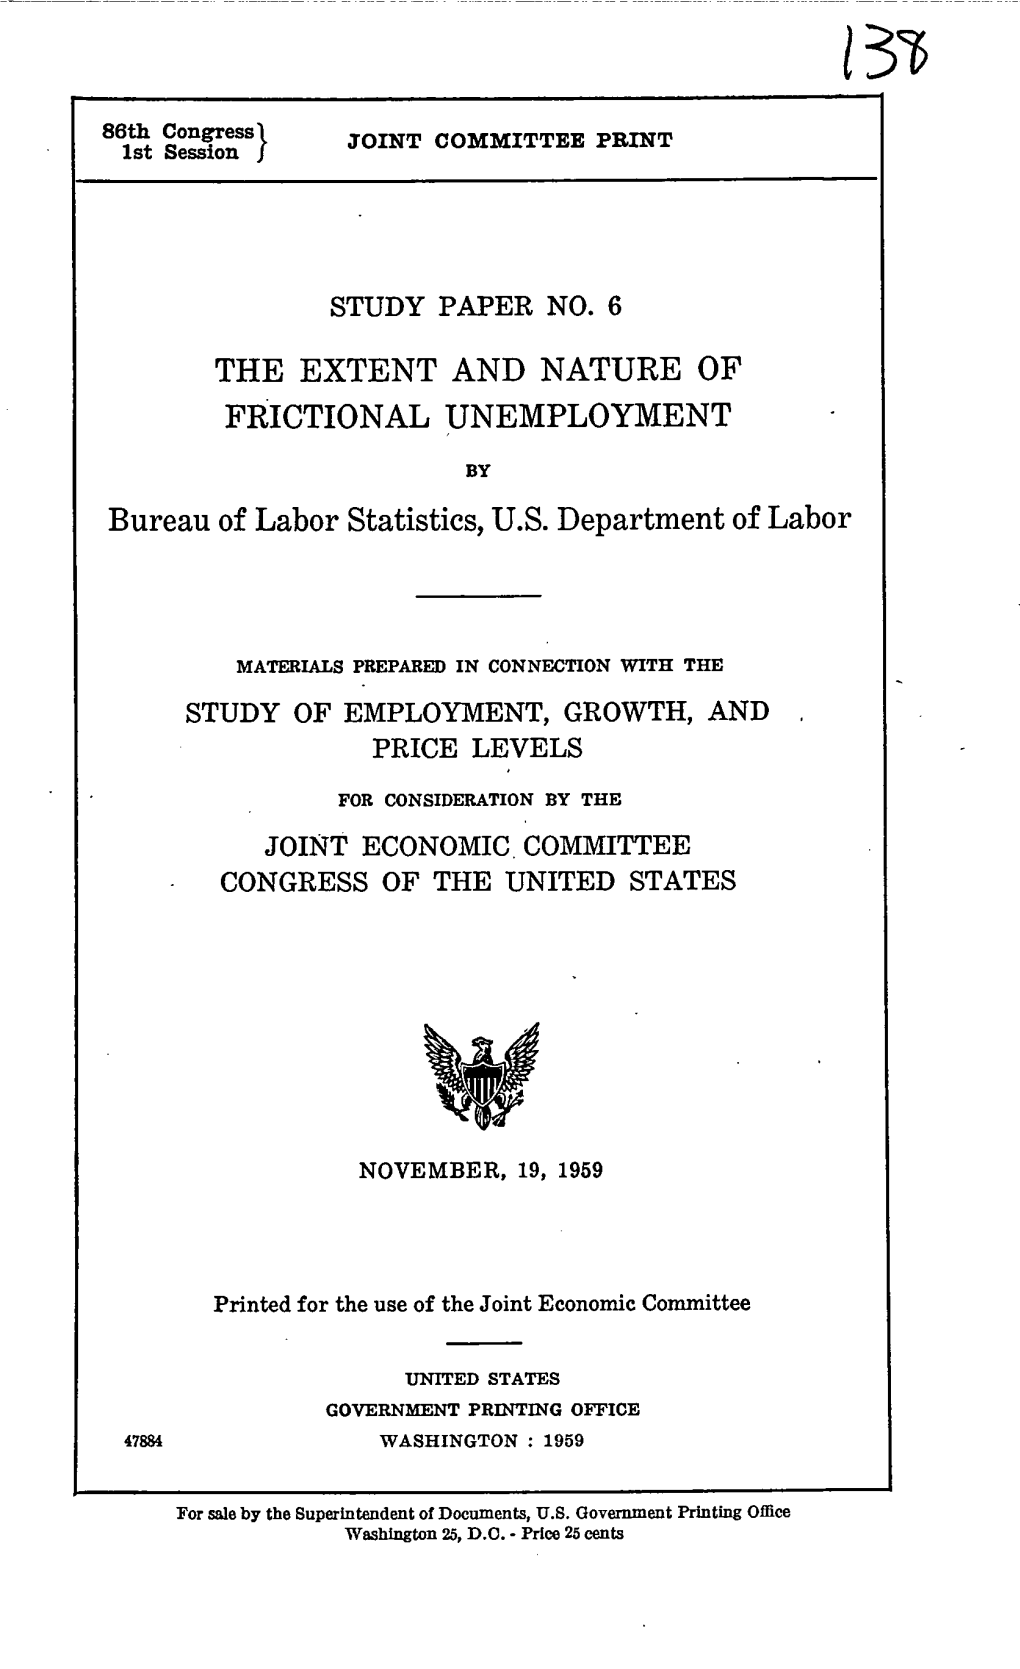 The Extent and Nature of Frictional Unemployment